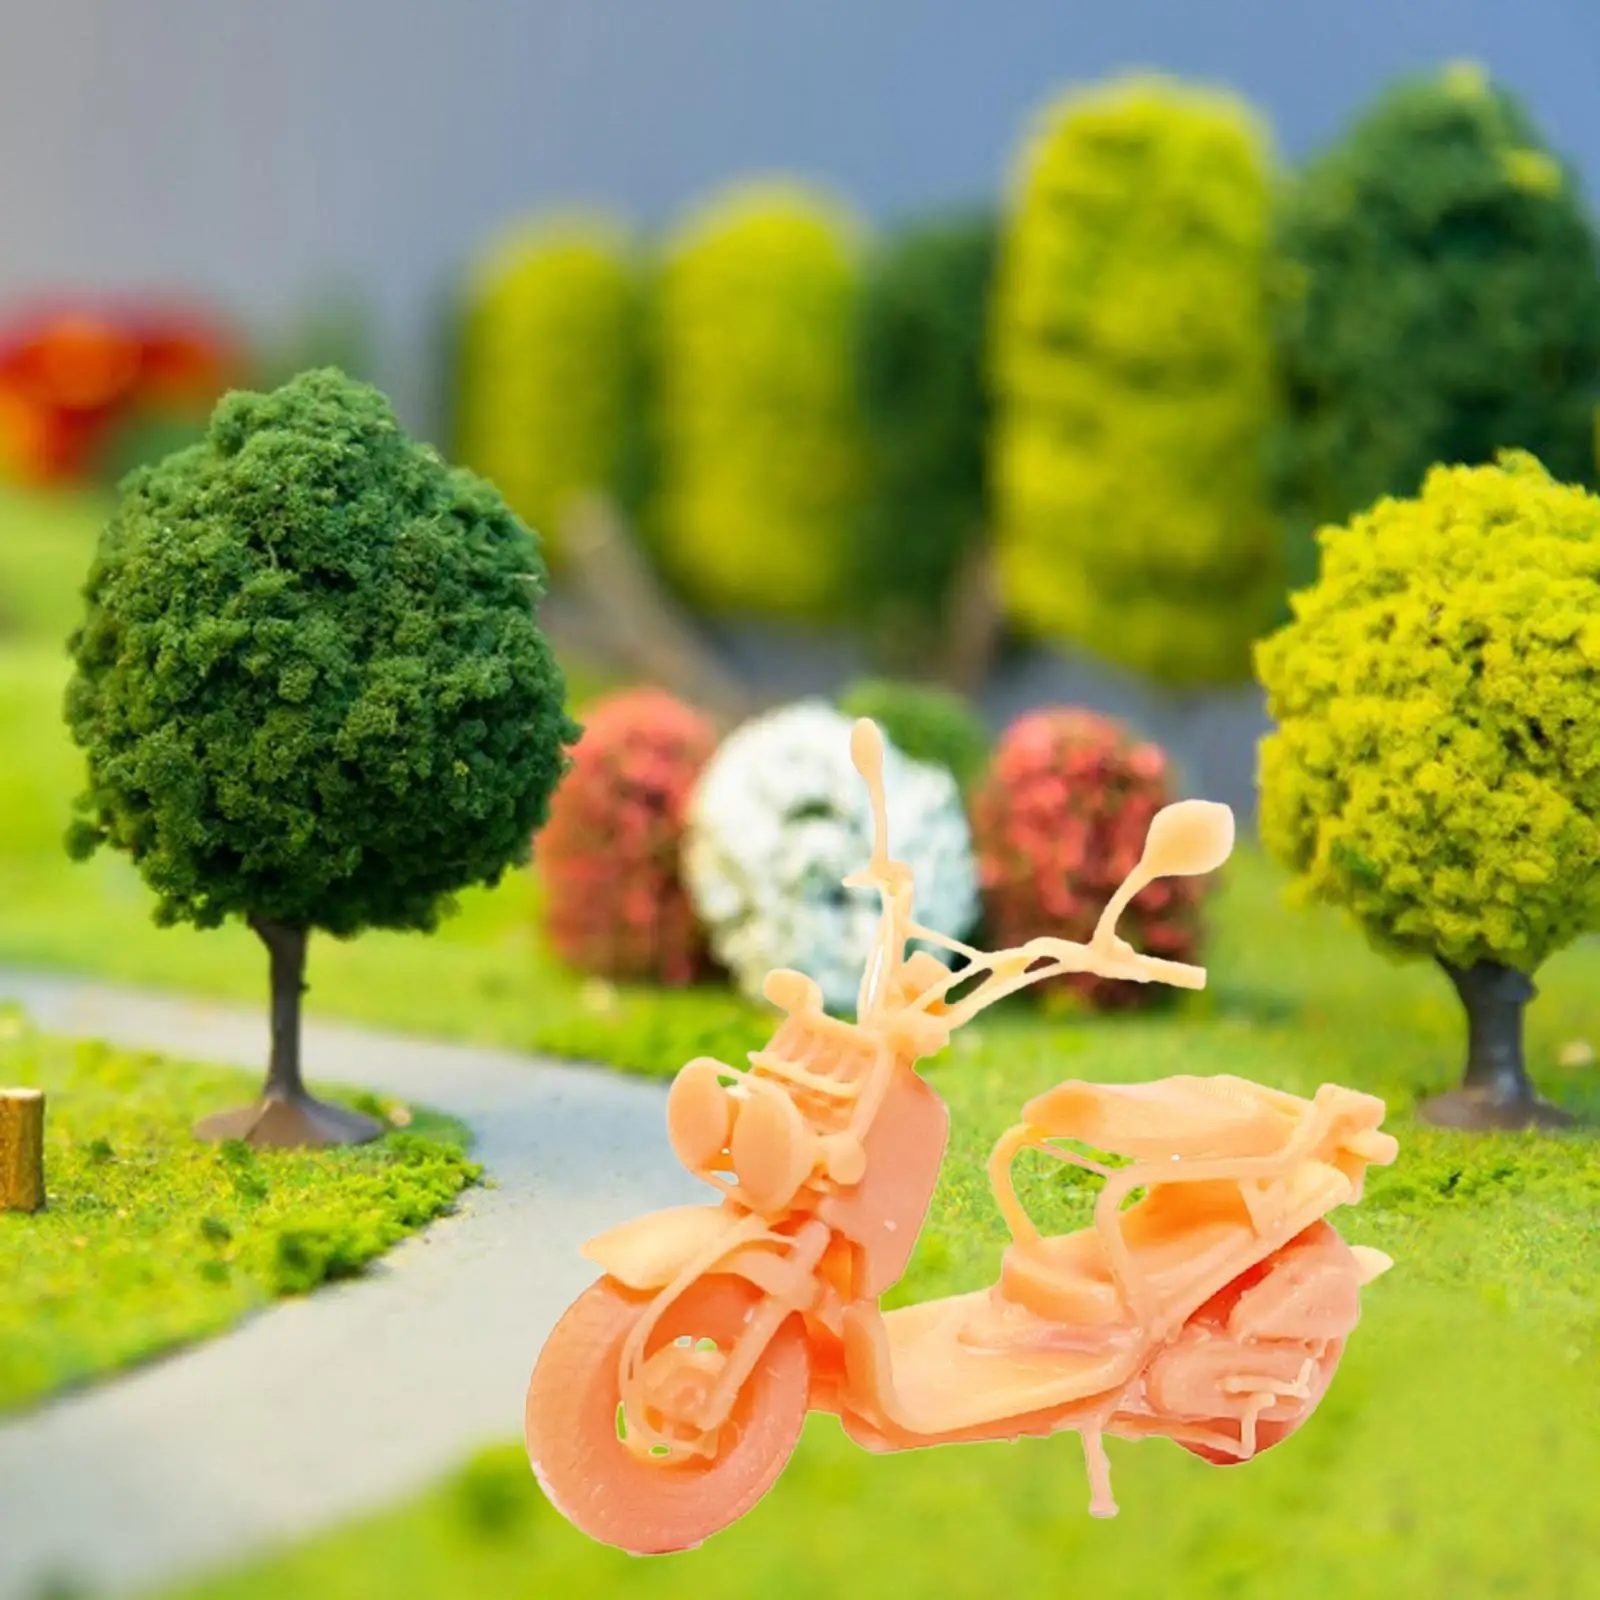 1/64 Miniature Motorcycle Model Diorama Motorcycle Toys for Dollhouse Photography Props Diorama Scenery Landscape Decoration